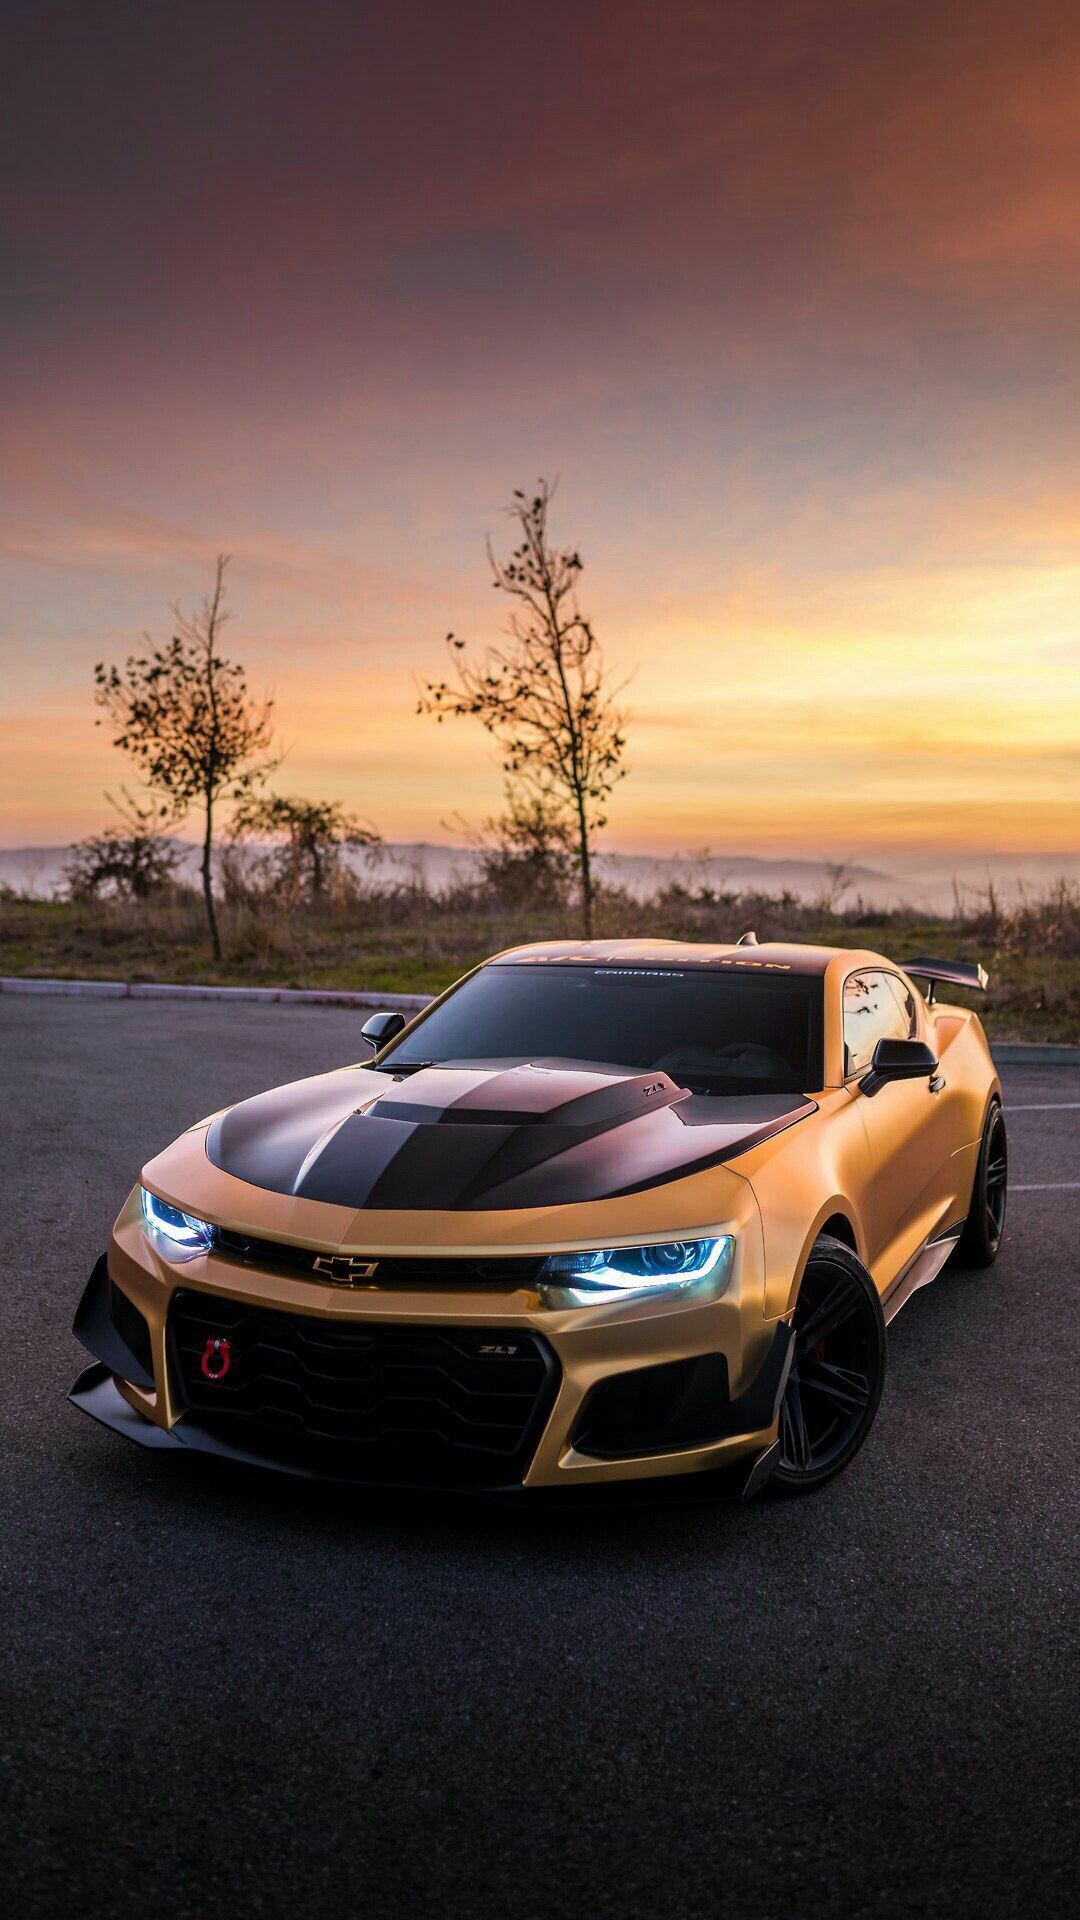 Chevrolet: 6-speed manual transmission with Active Rev Matching, Available 10-speed paddle-shift automatic transmission, ZL1 1LE. 1080x1920 Full HD Background.